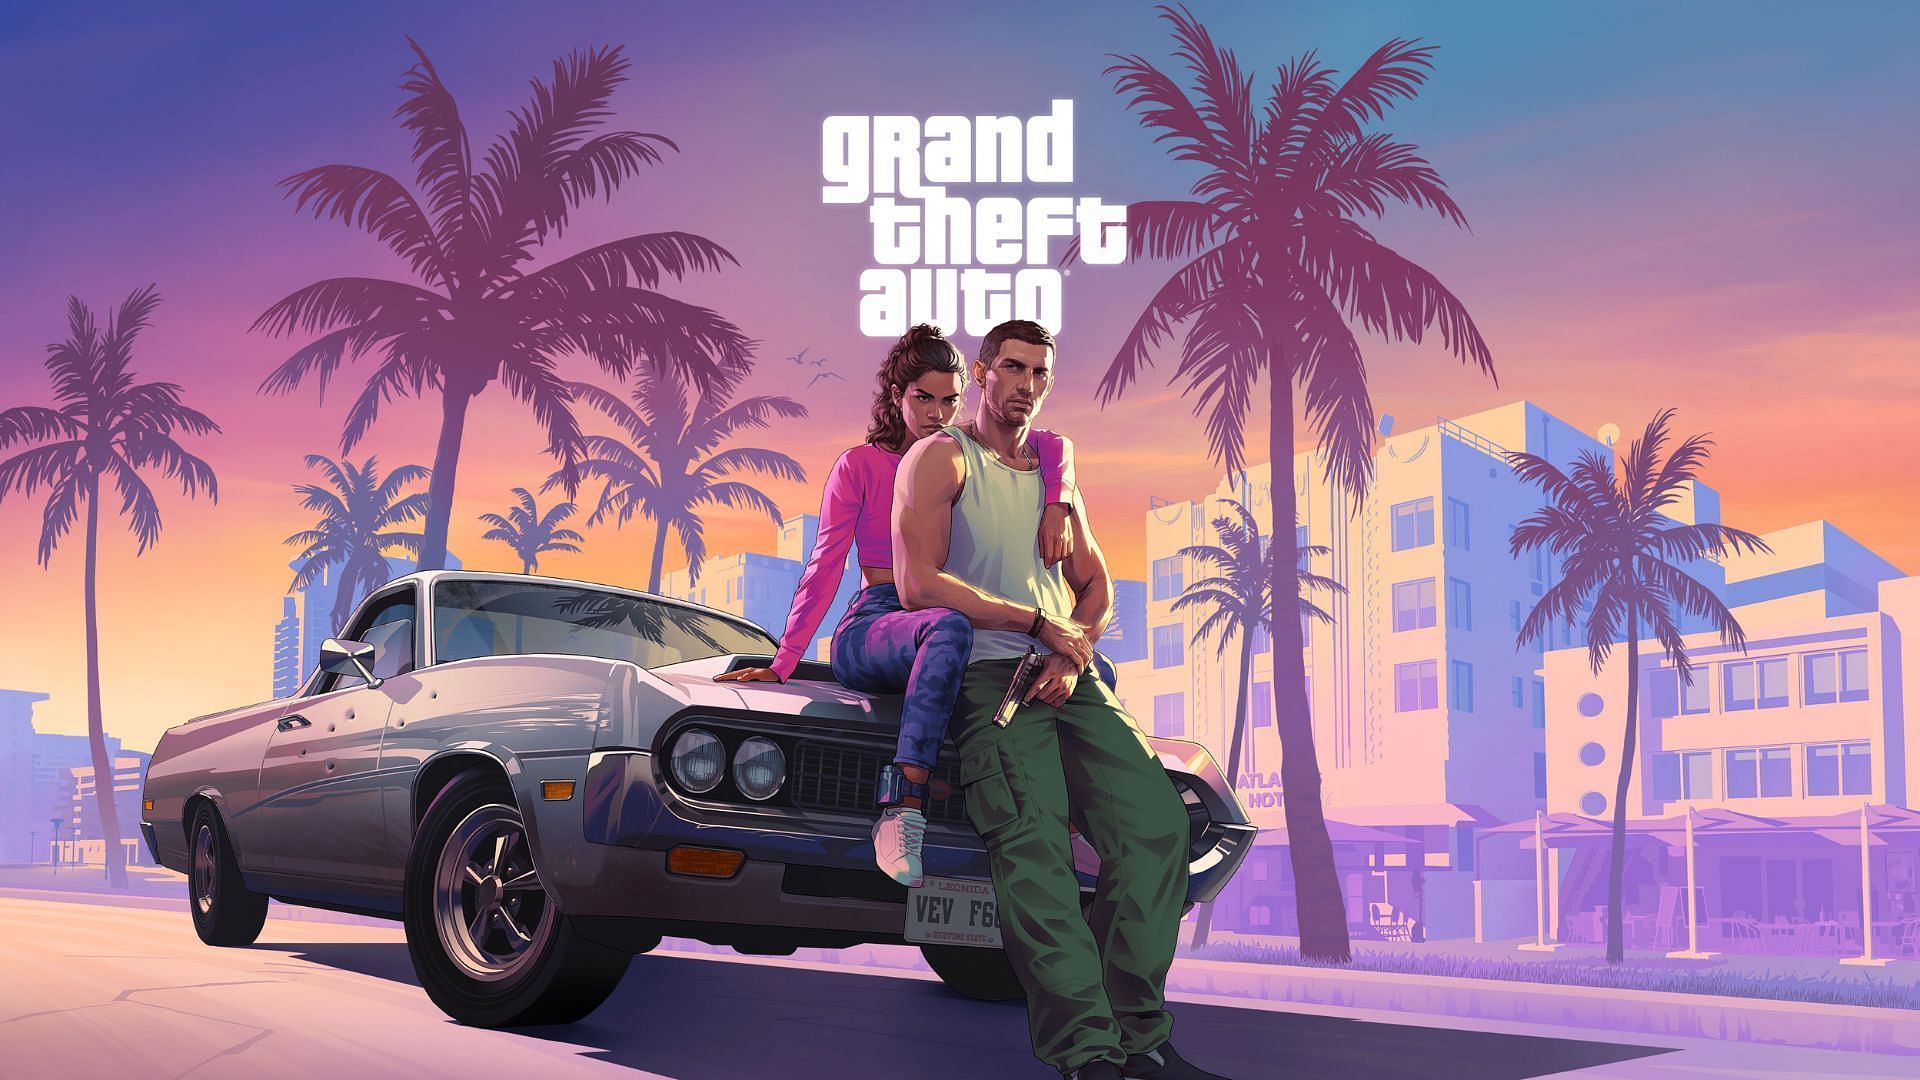 GTA VI will supposedly feature a protagonist duo inspired by Bonnie and Clyde (Image via Rockstar Games)